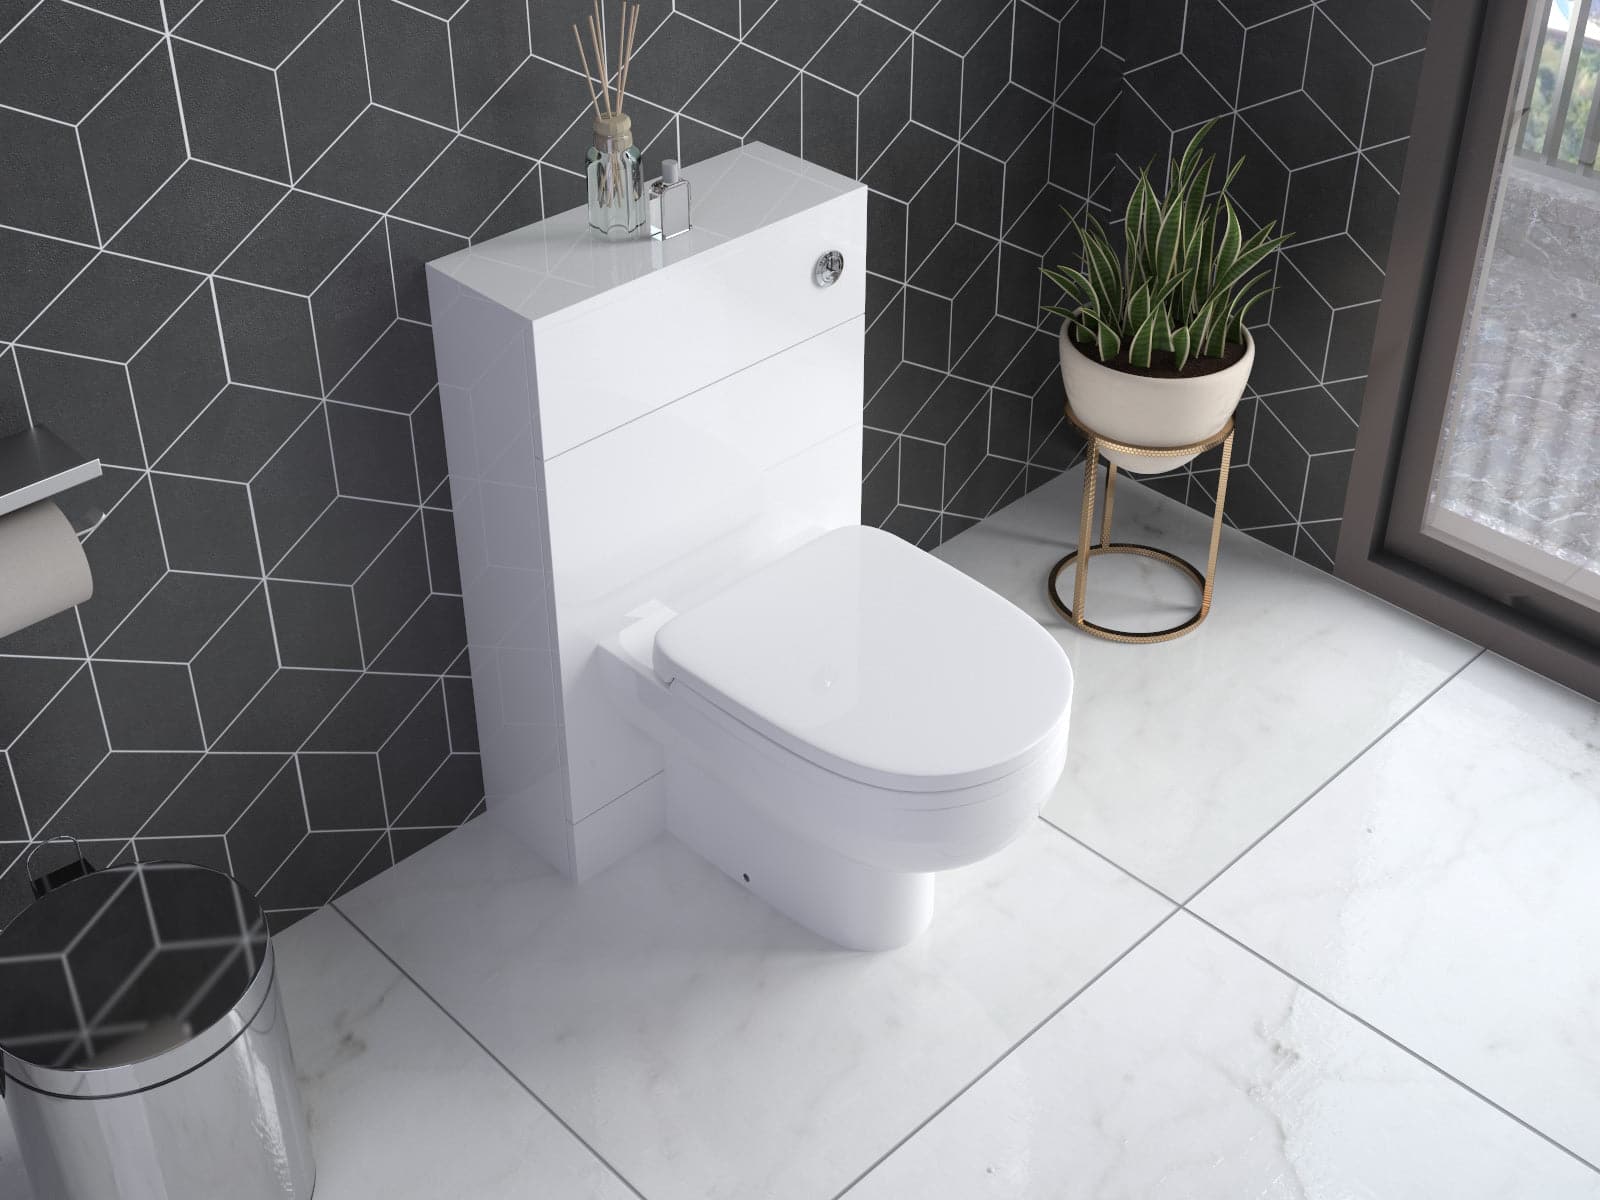 Modern White Close Coupled Toilet with Soft Close Seat and Cistern (SLK630) - Stylish and Water-Efficient Bathroom WC, Easy to Clean, Ideal for Contemporary UK Homes.